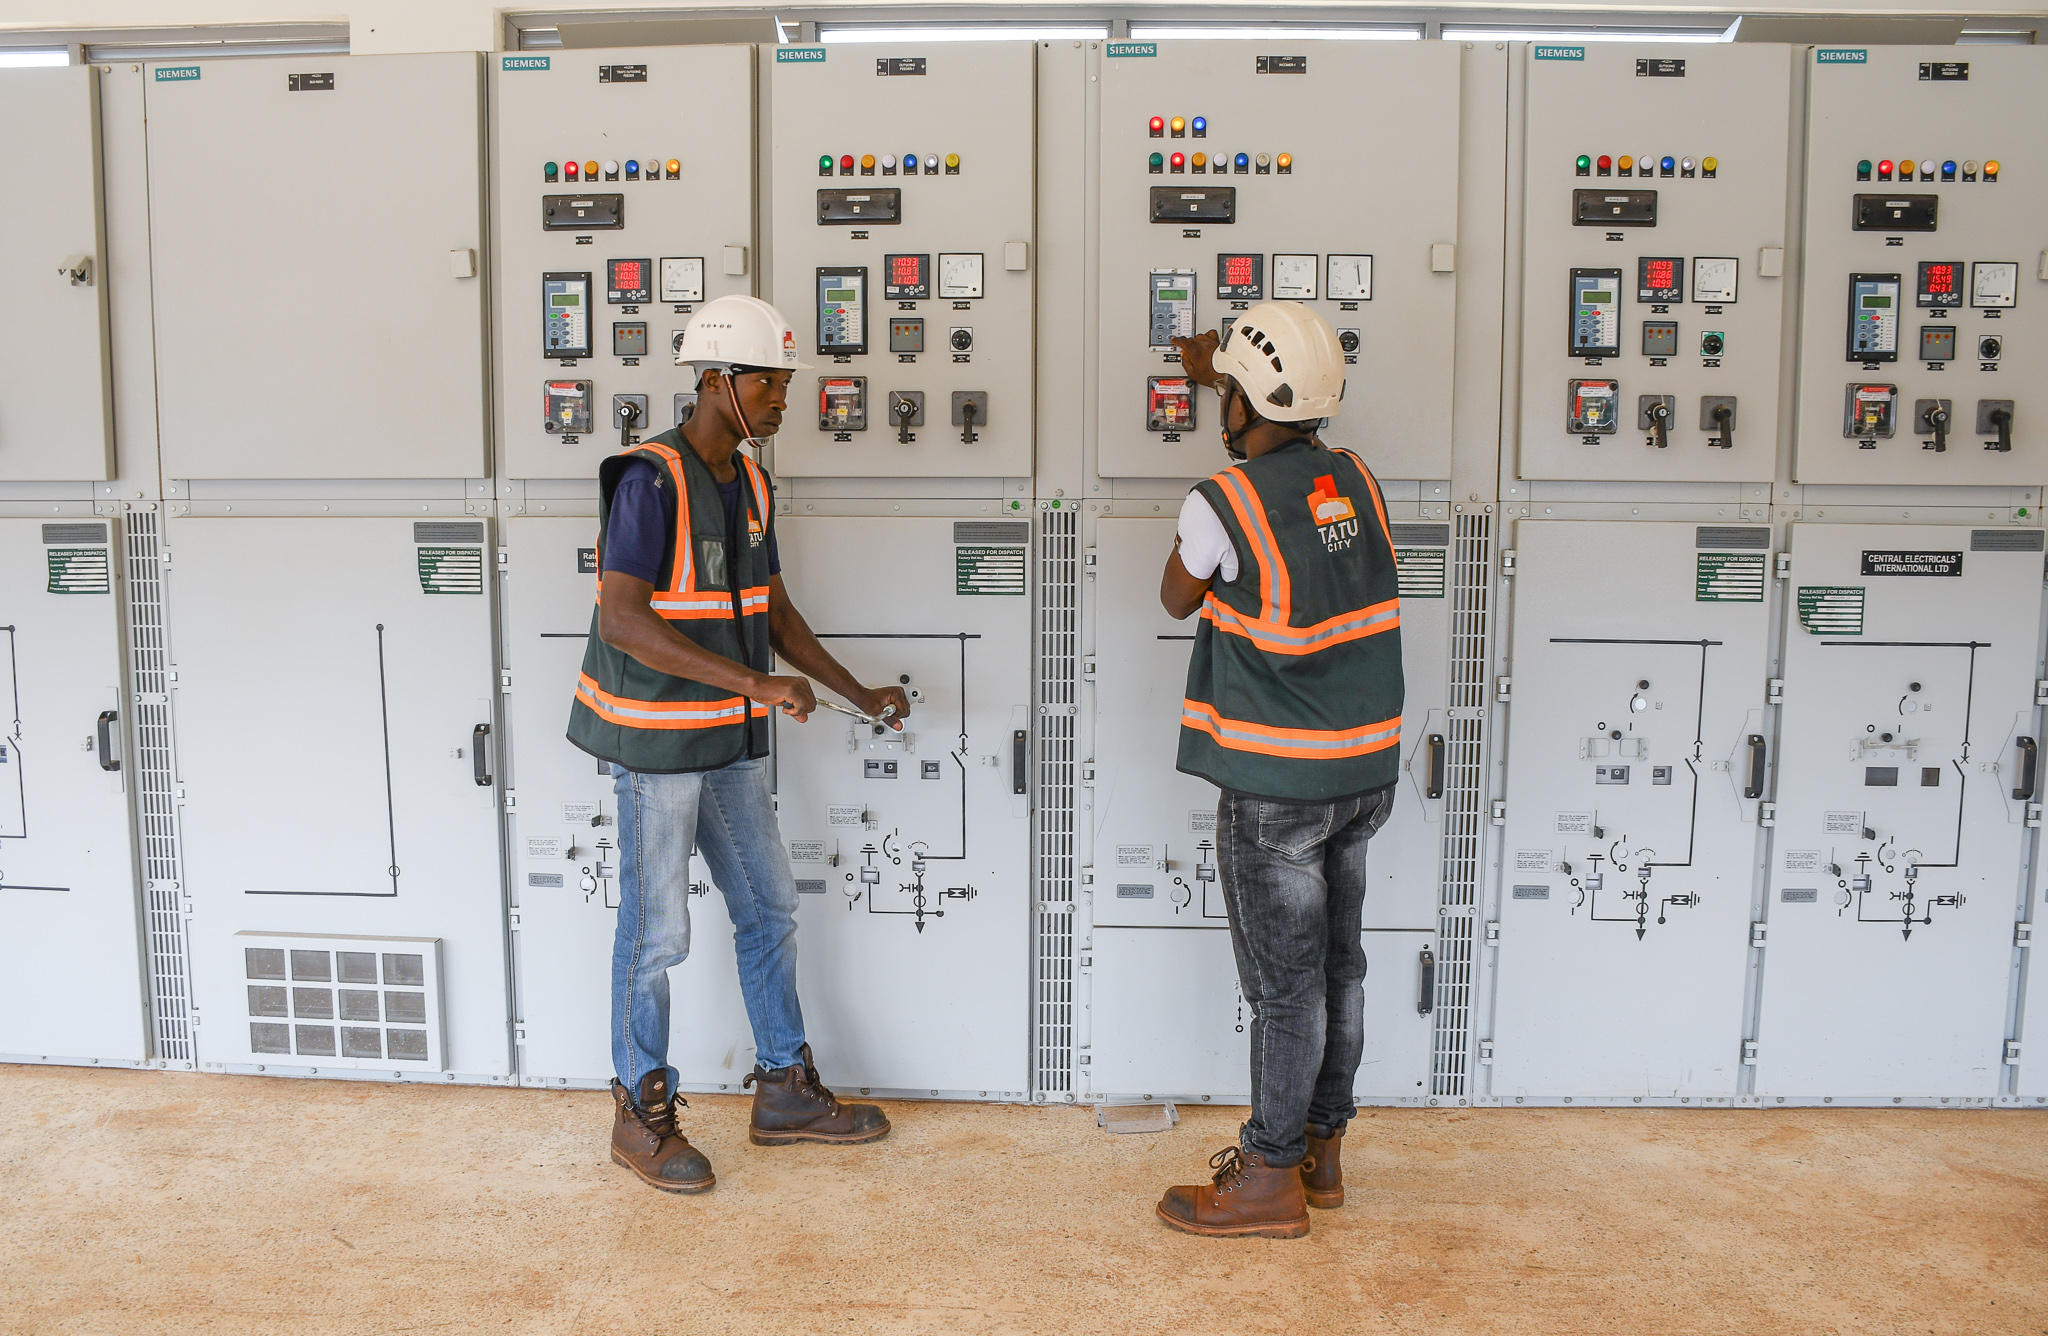 Tatu City businesses connected to permanent power